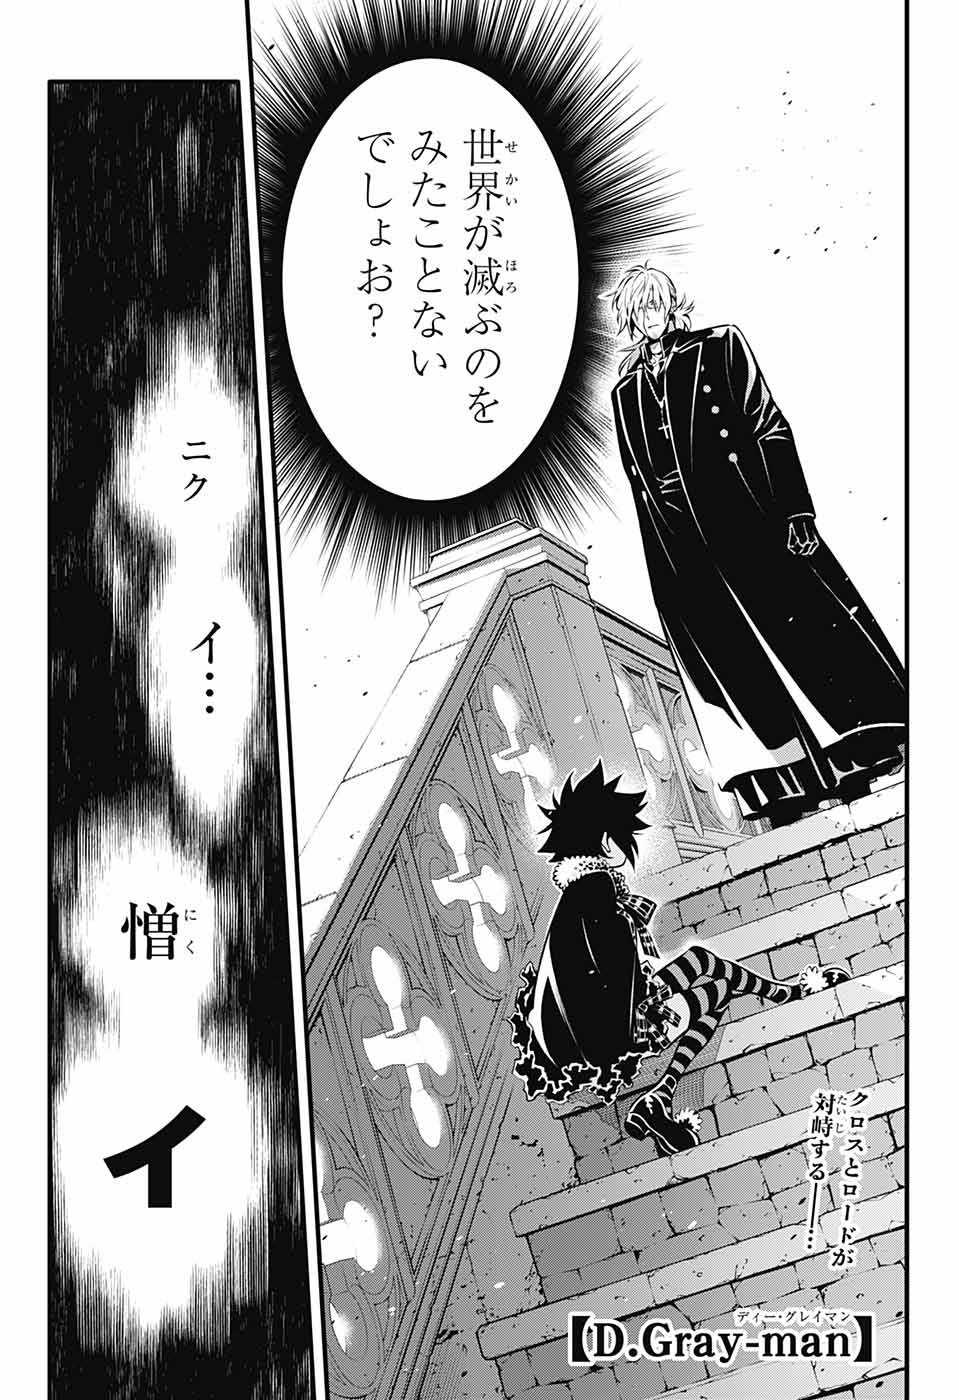 D Gray Man - Chapter 235 - Page 3